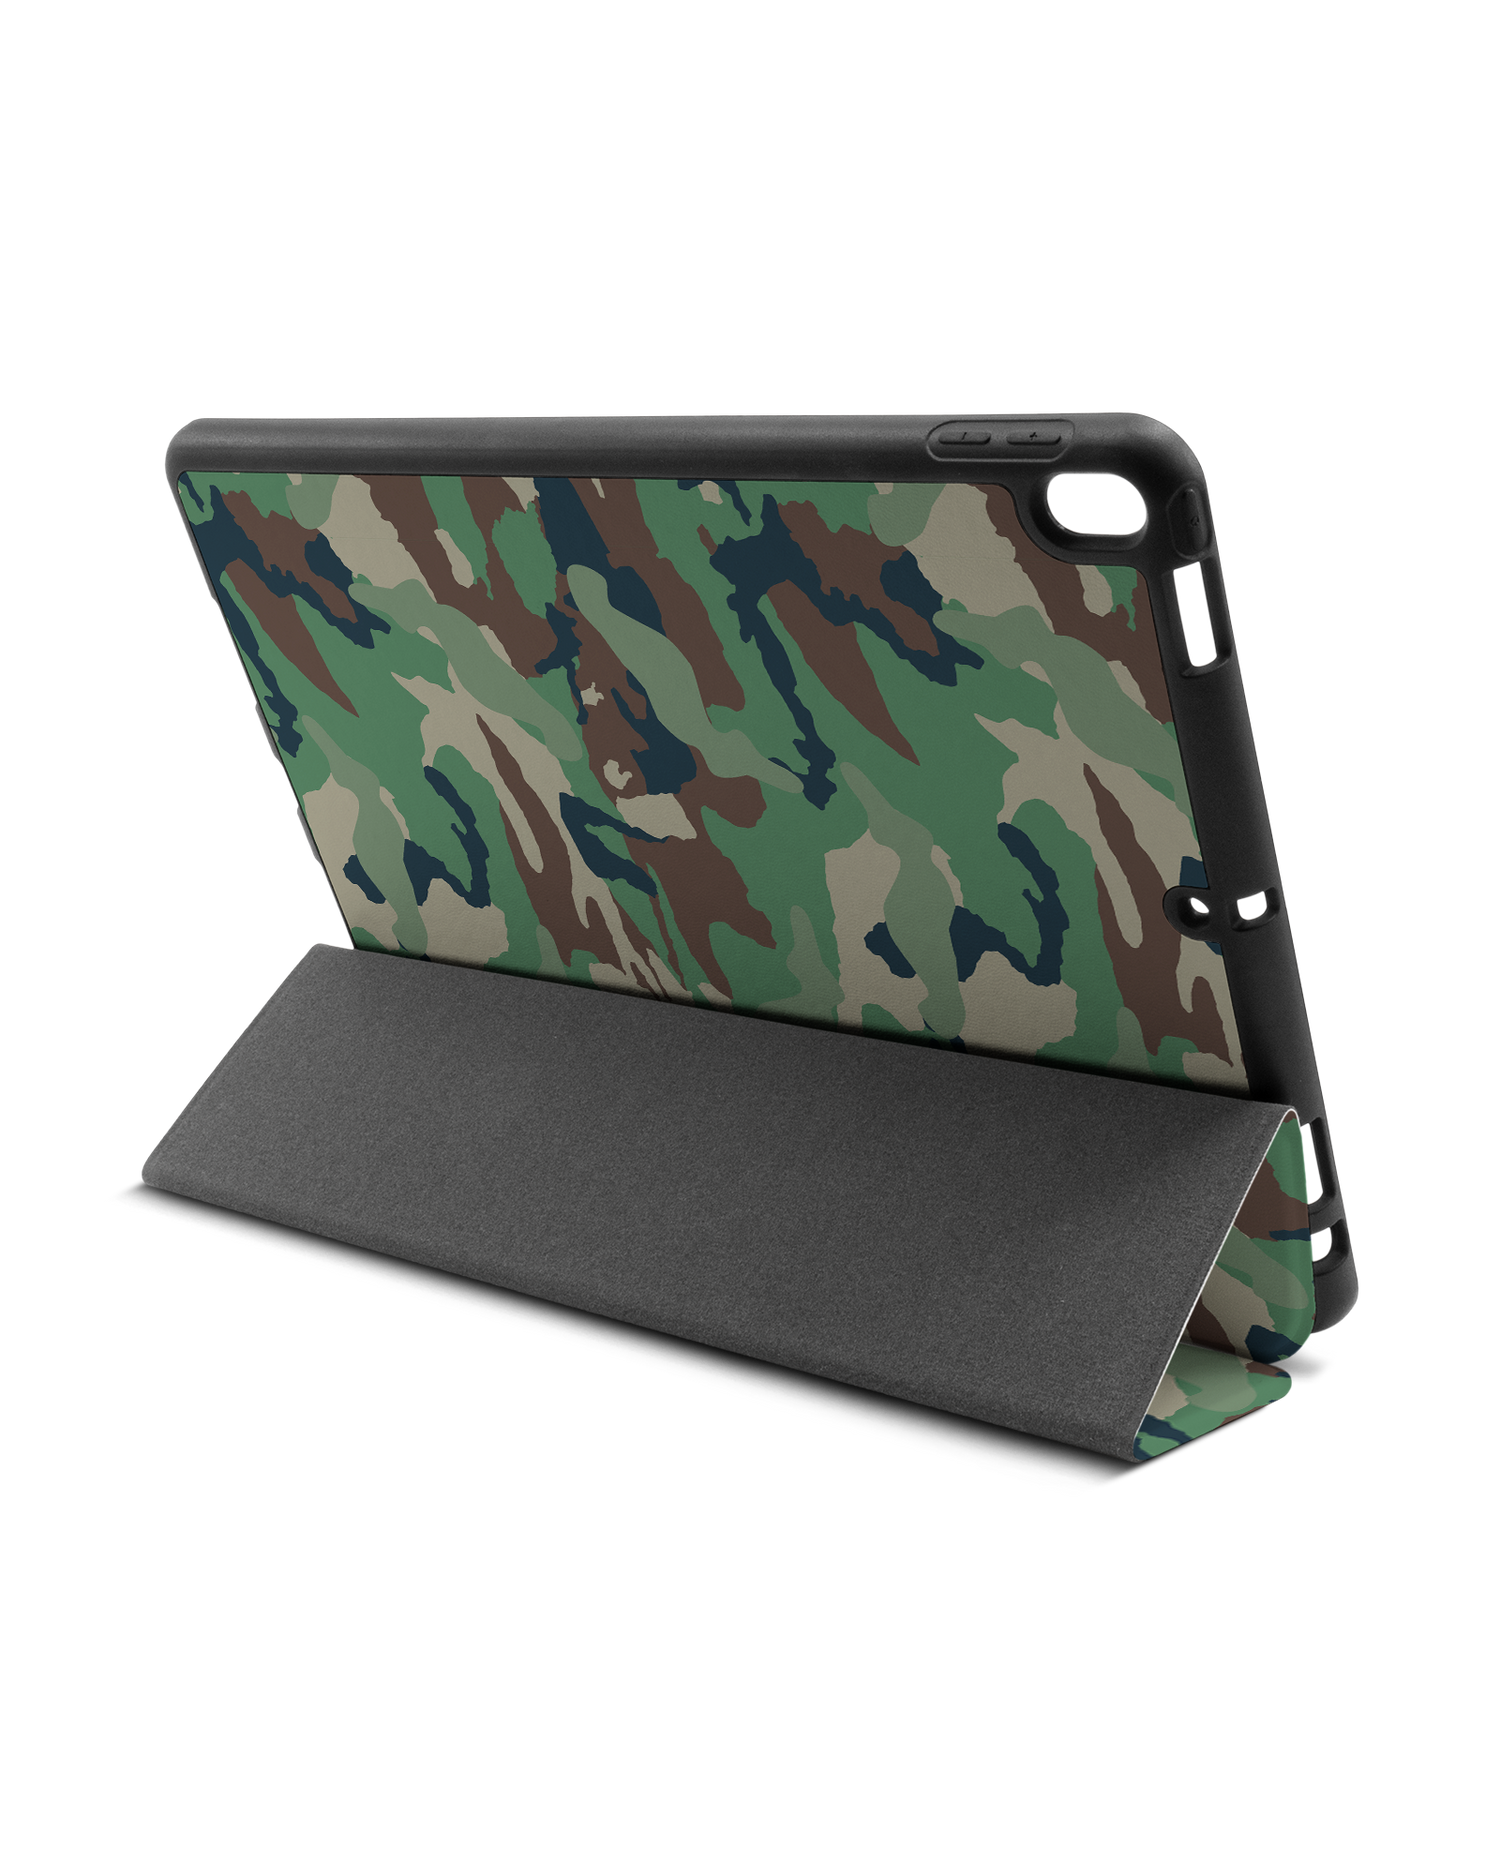 Green and Brown Camo iPad Case with Pencil Holder Apple iPad Pro 10.5